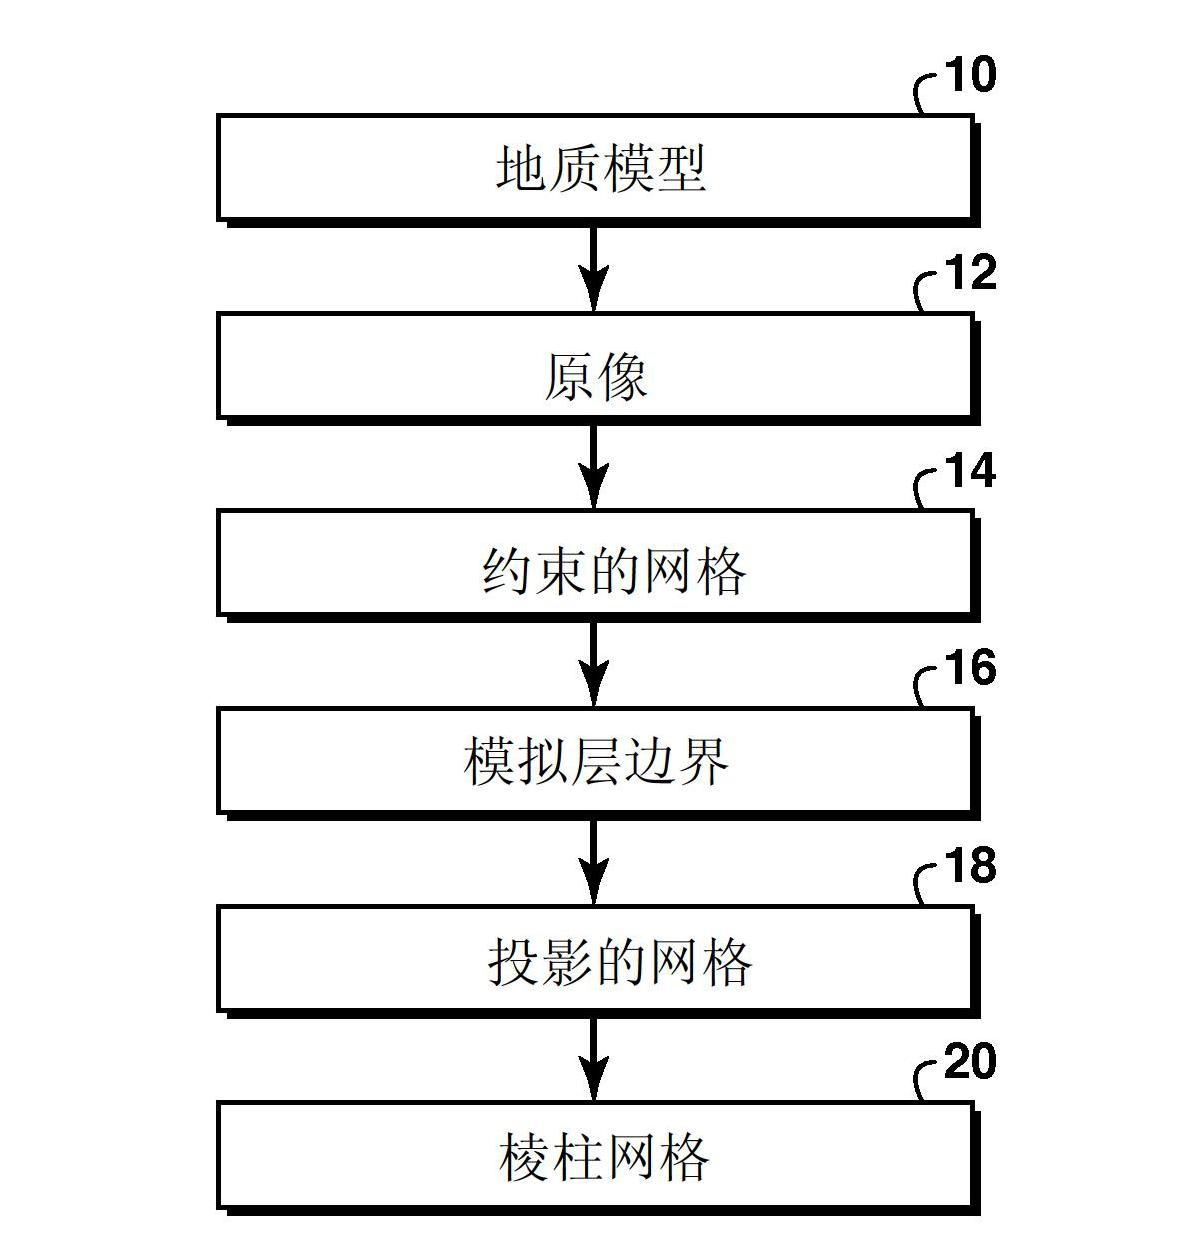 Method and apparatus for reservoir modeling and simulation